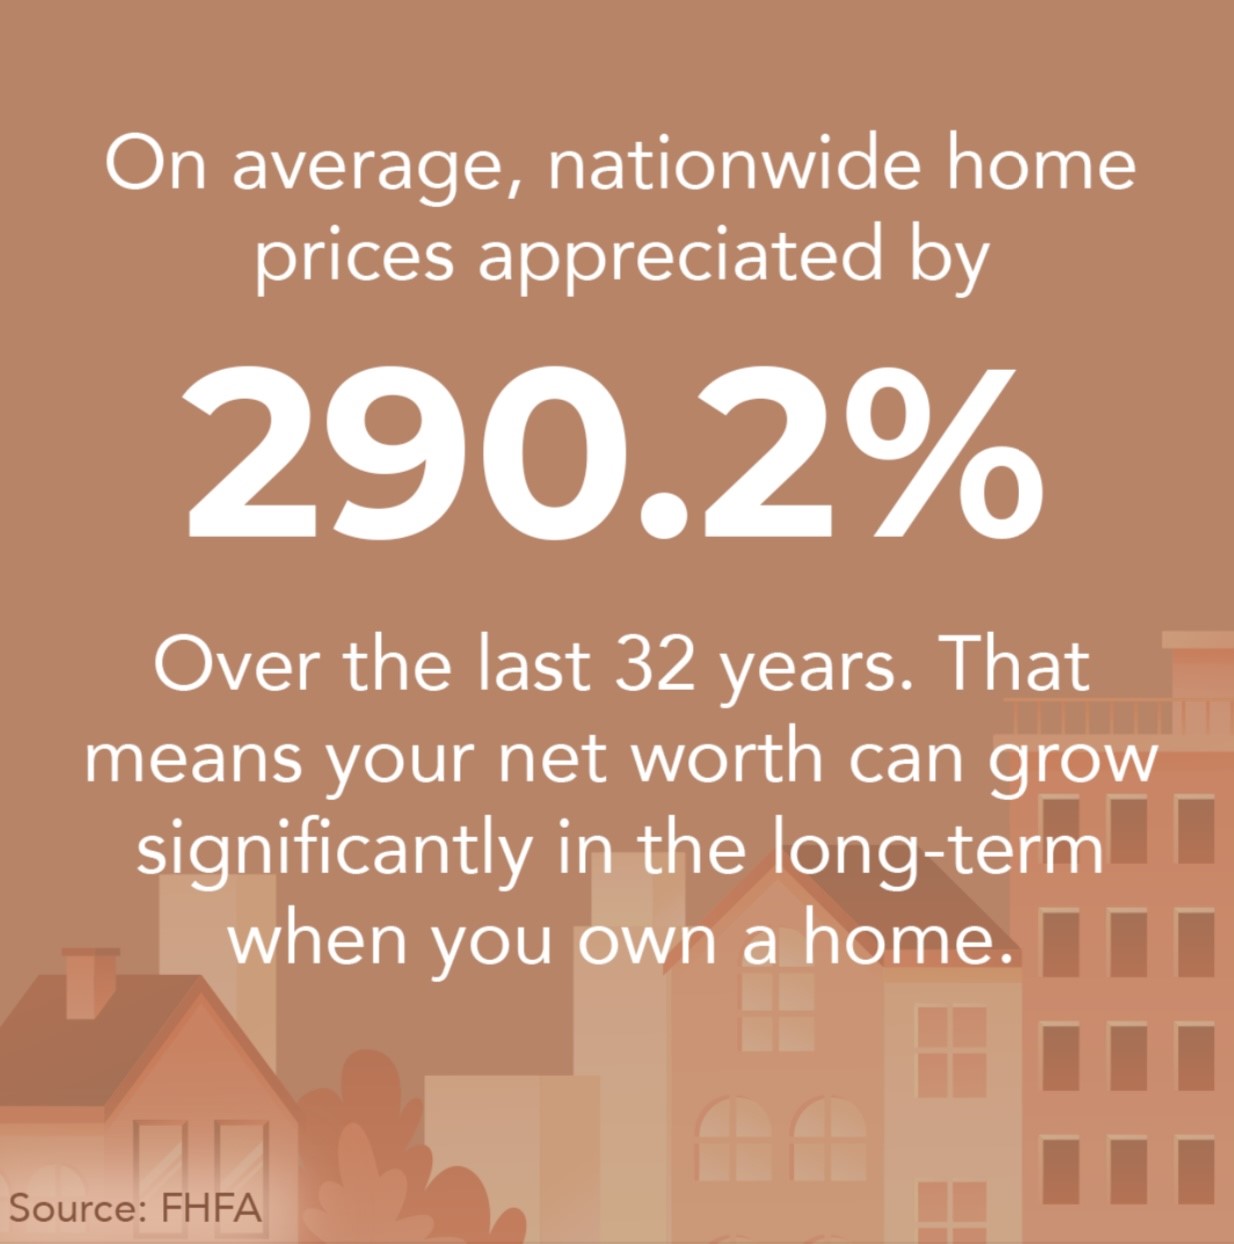 Building Wealth with Home Ownership